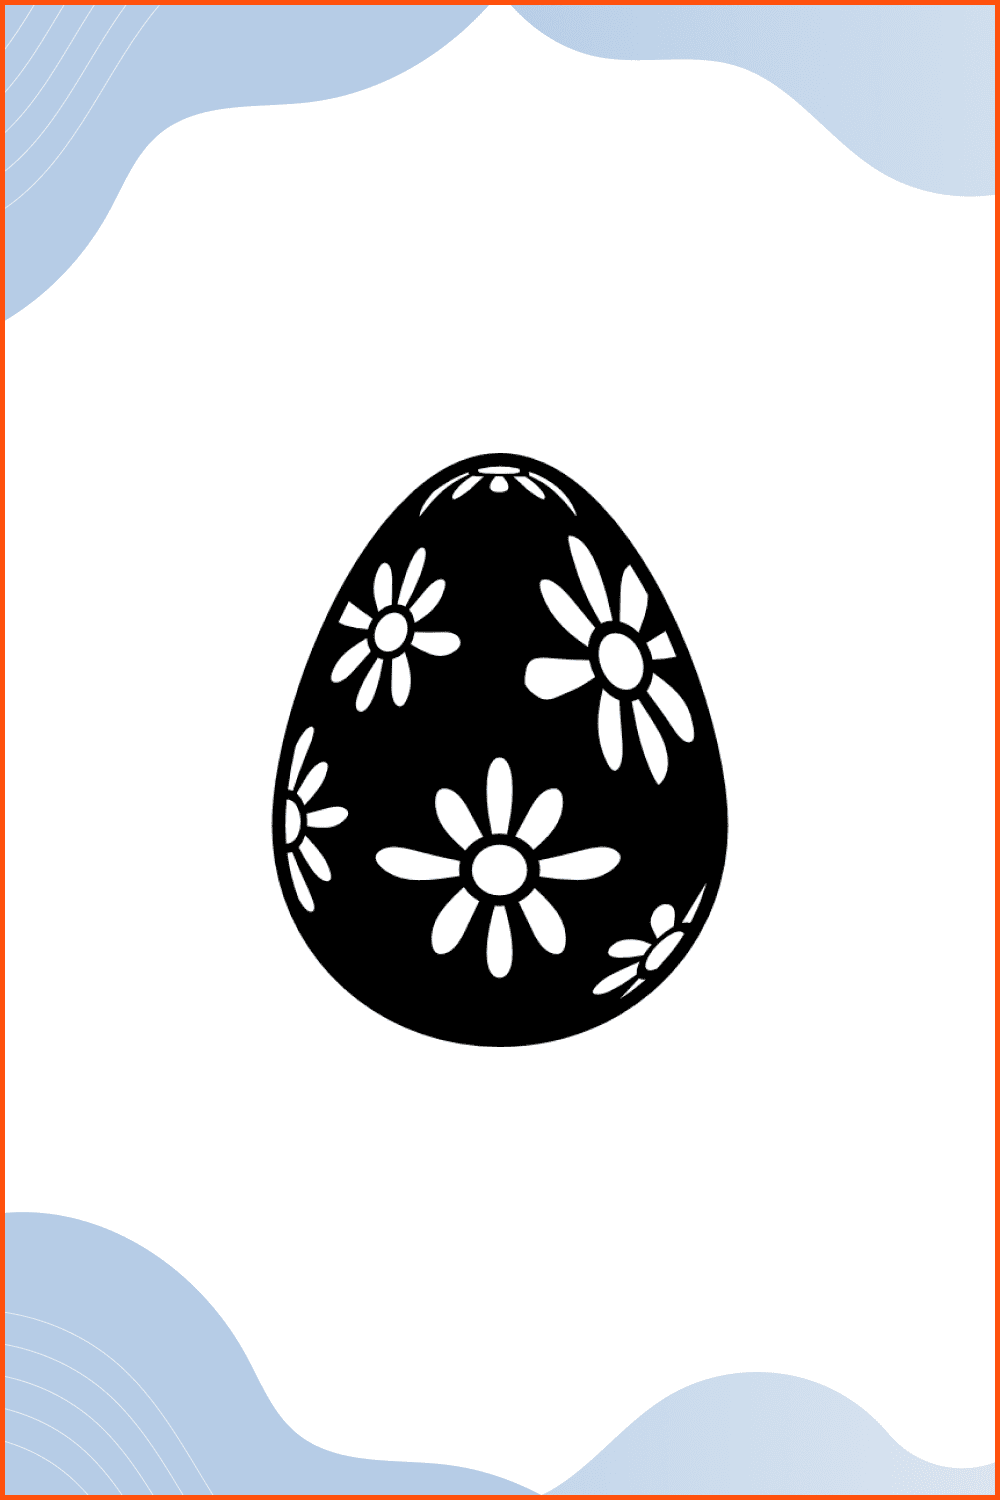 Free-icon easter egg with daisies design.